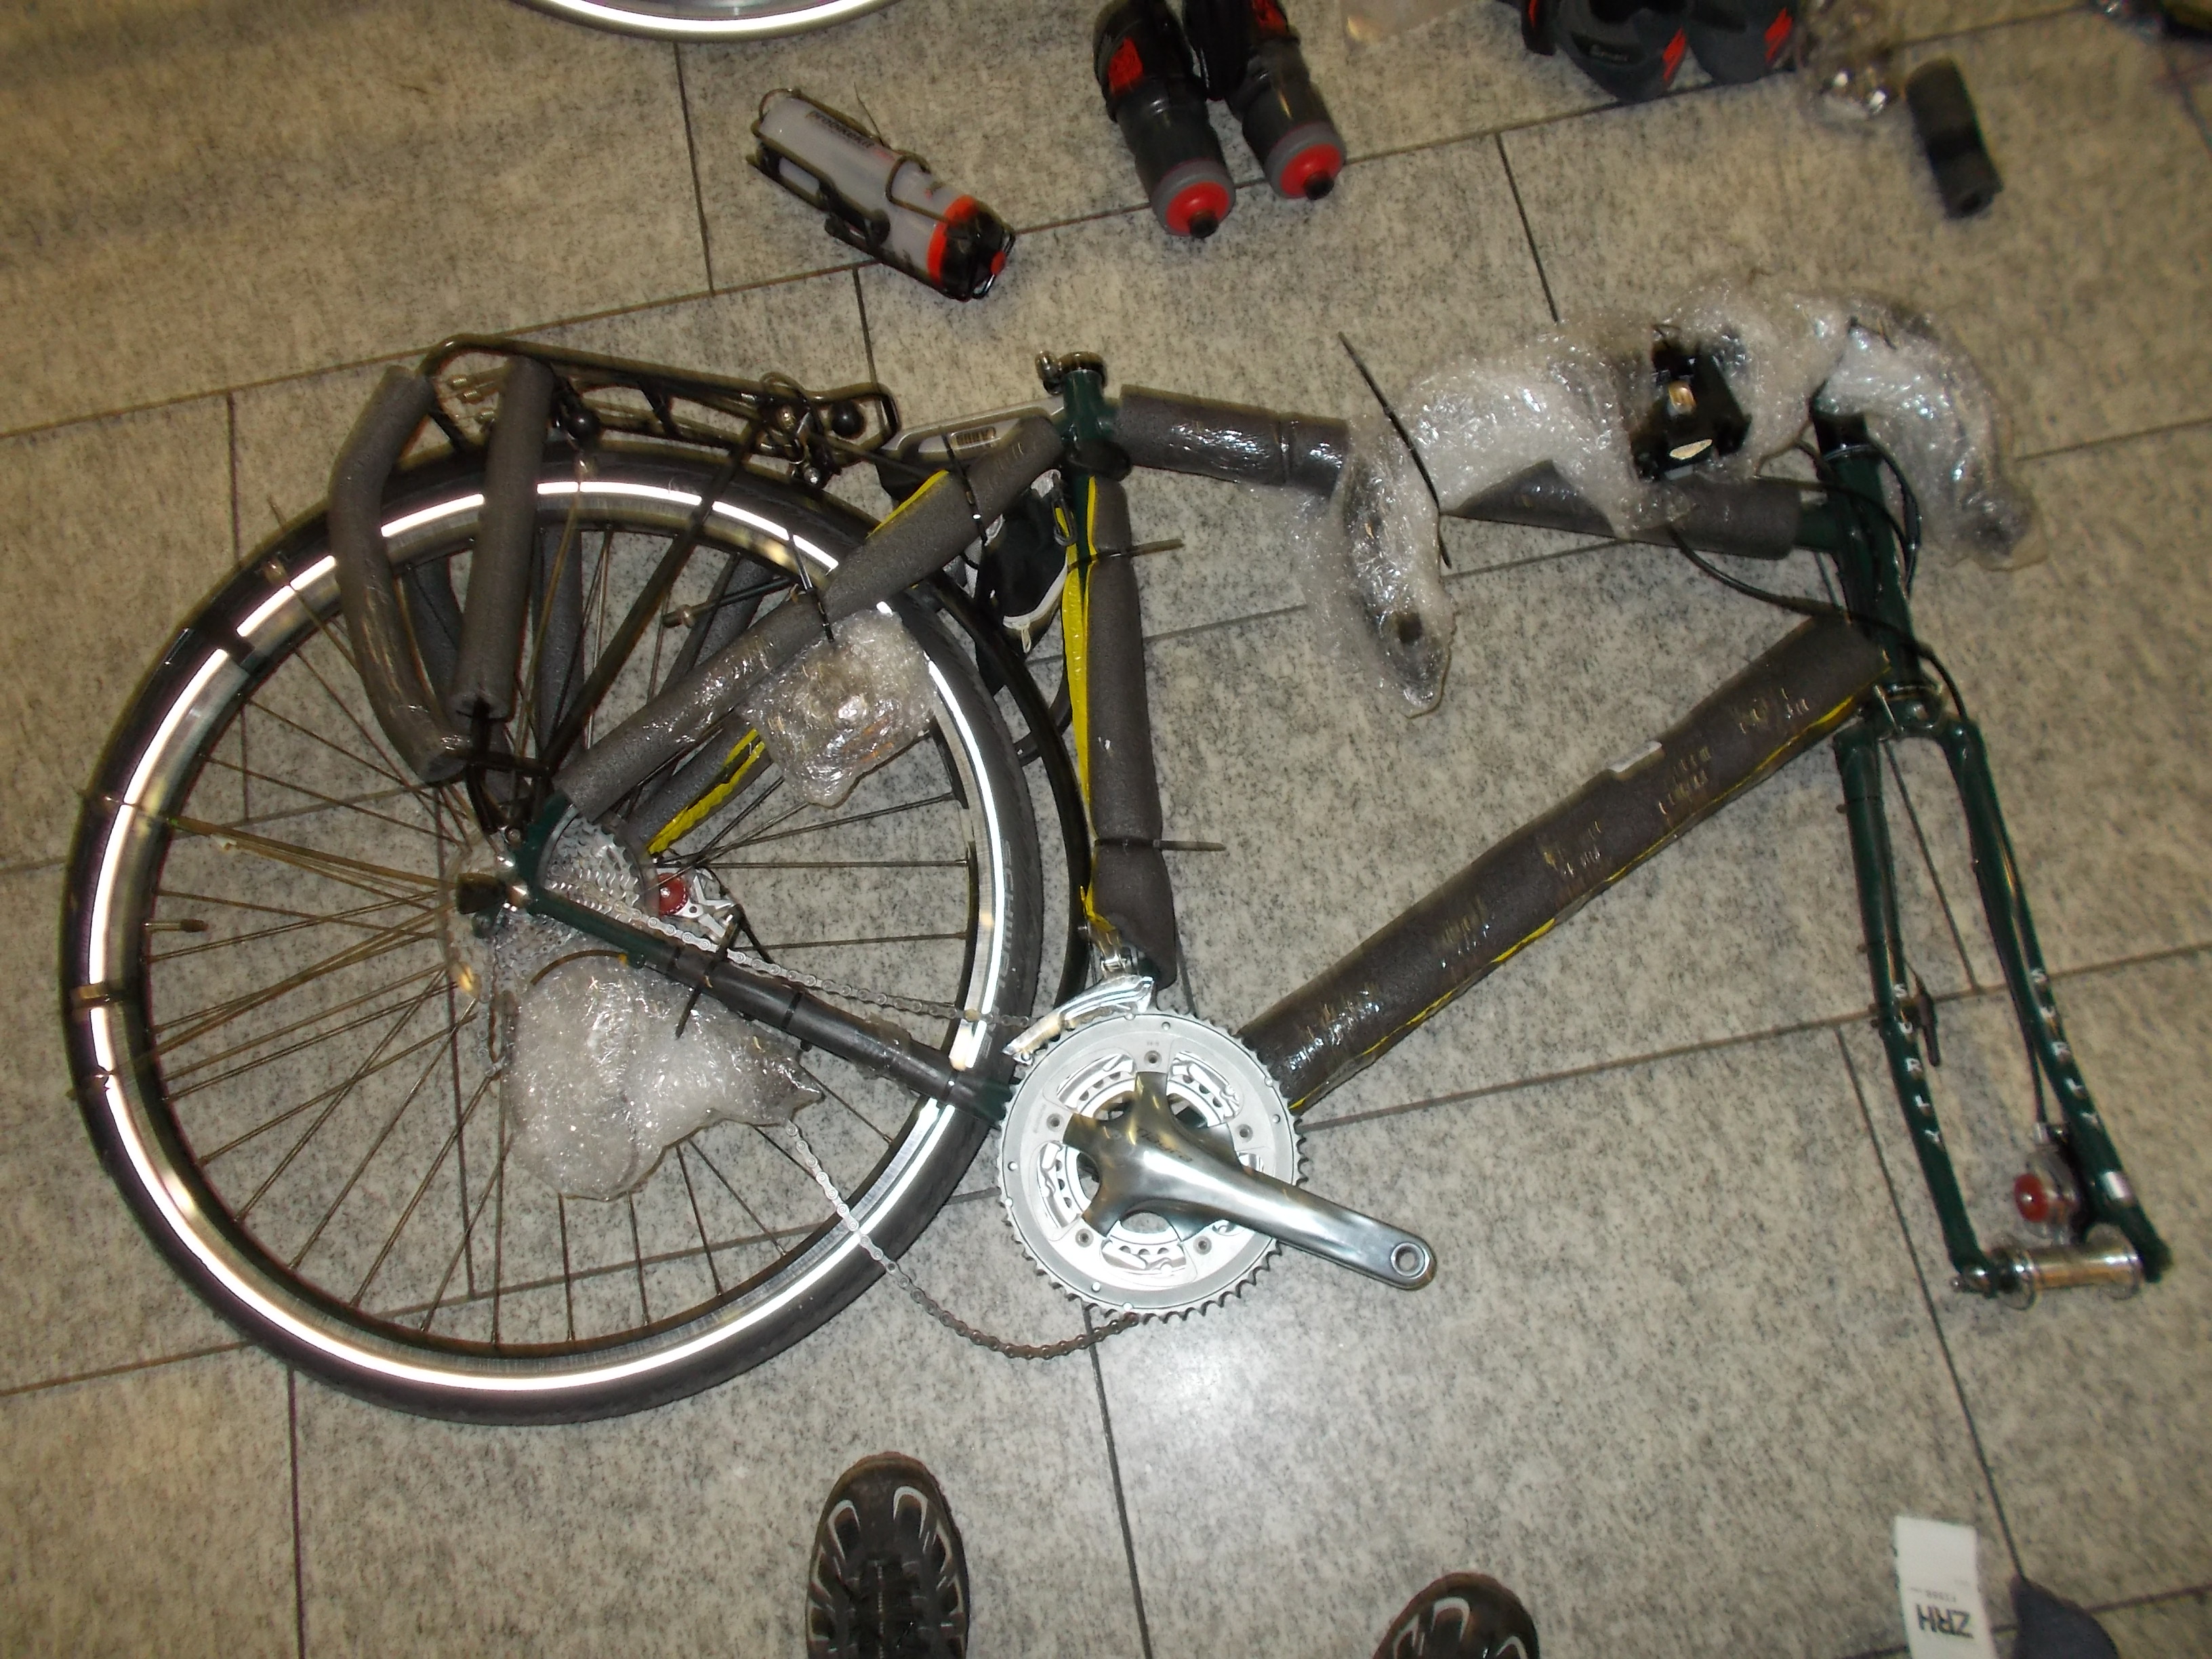 A Surly Disc Trucker bike (green) ready for reassembly on the floor of the Zürich airport.